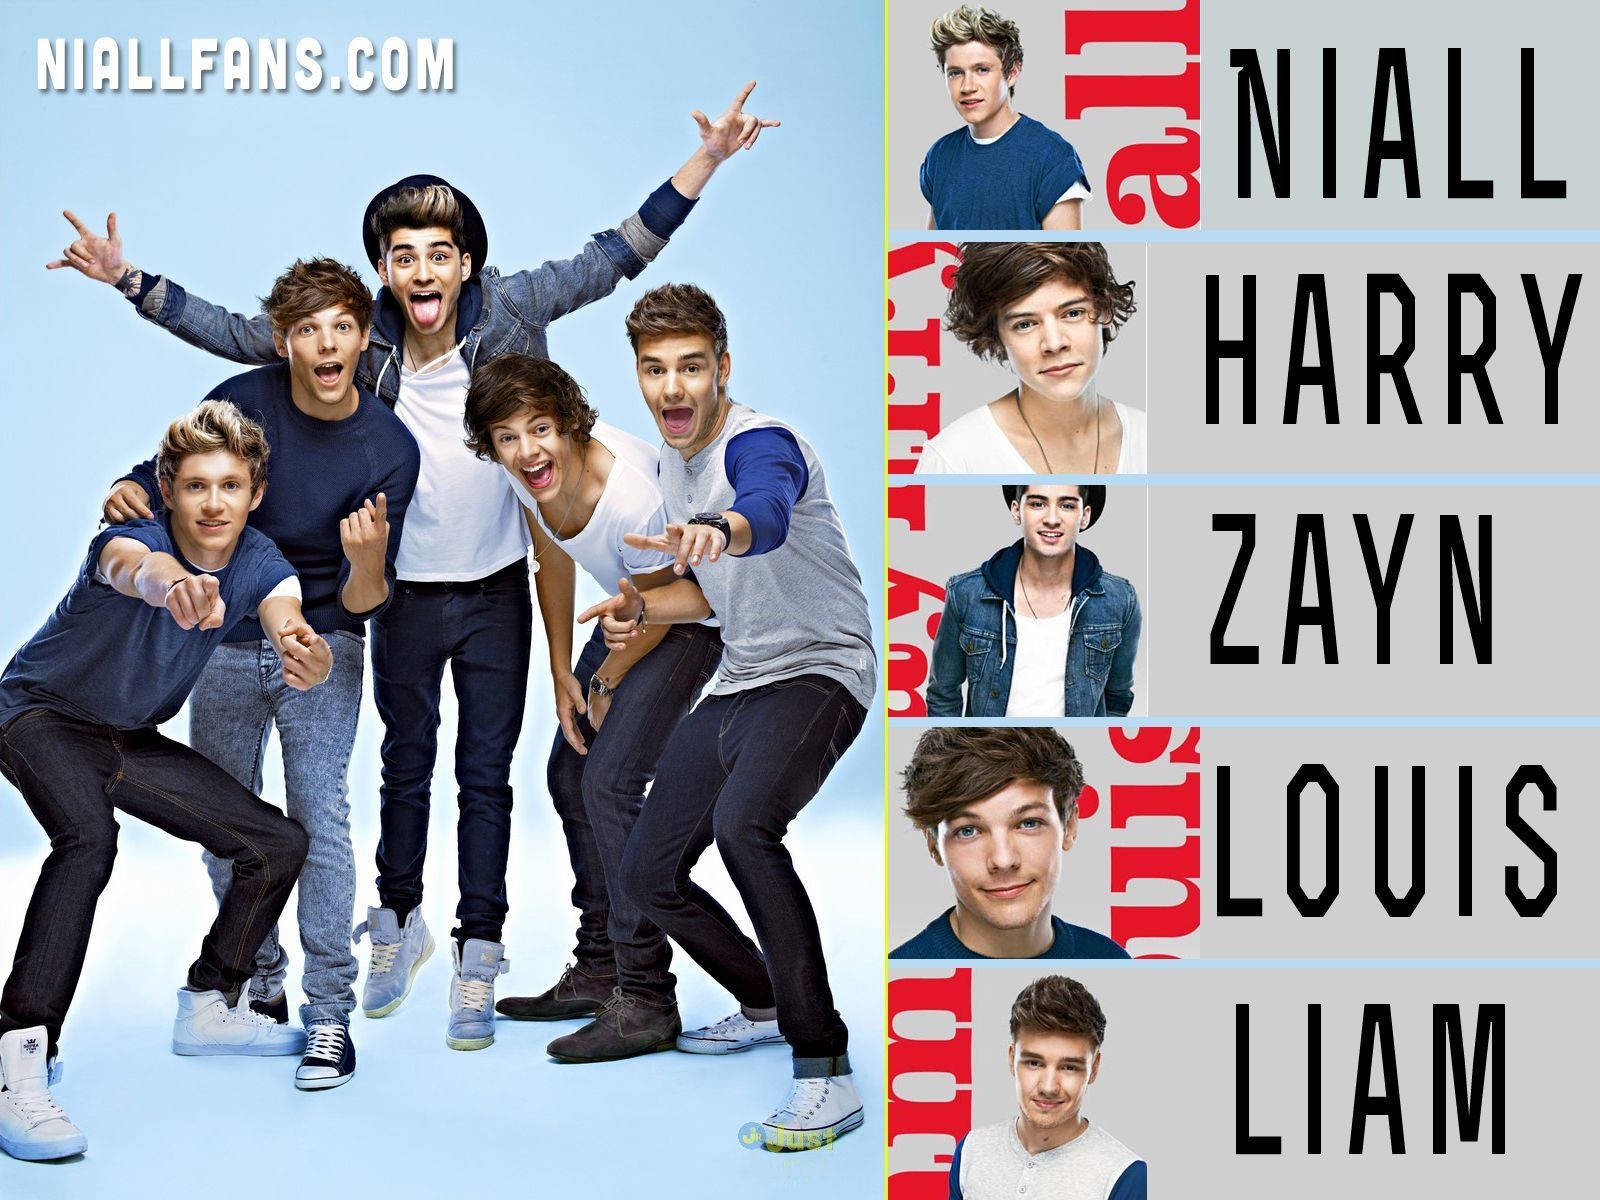 One Direction 1600X1200 Wallpaper and Background Image